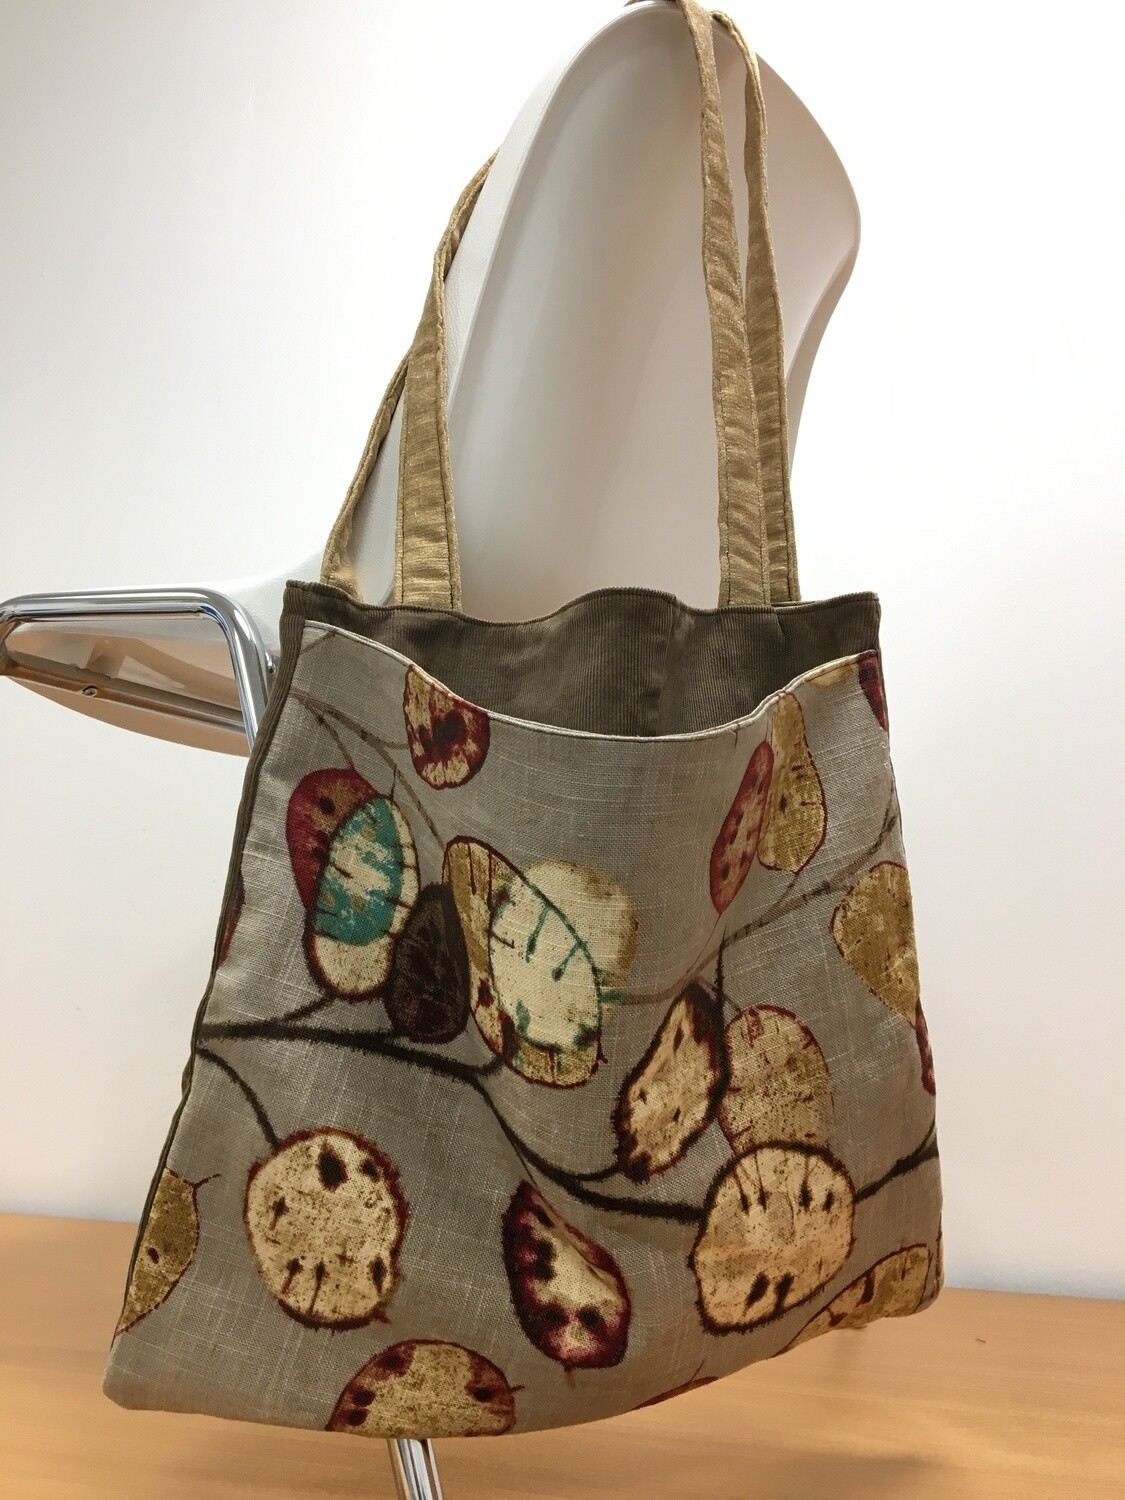 Muted Leaf Pattern and Denim Tote Bag for Living